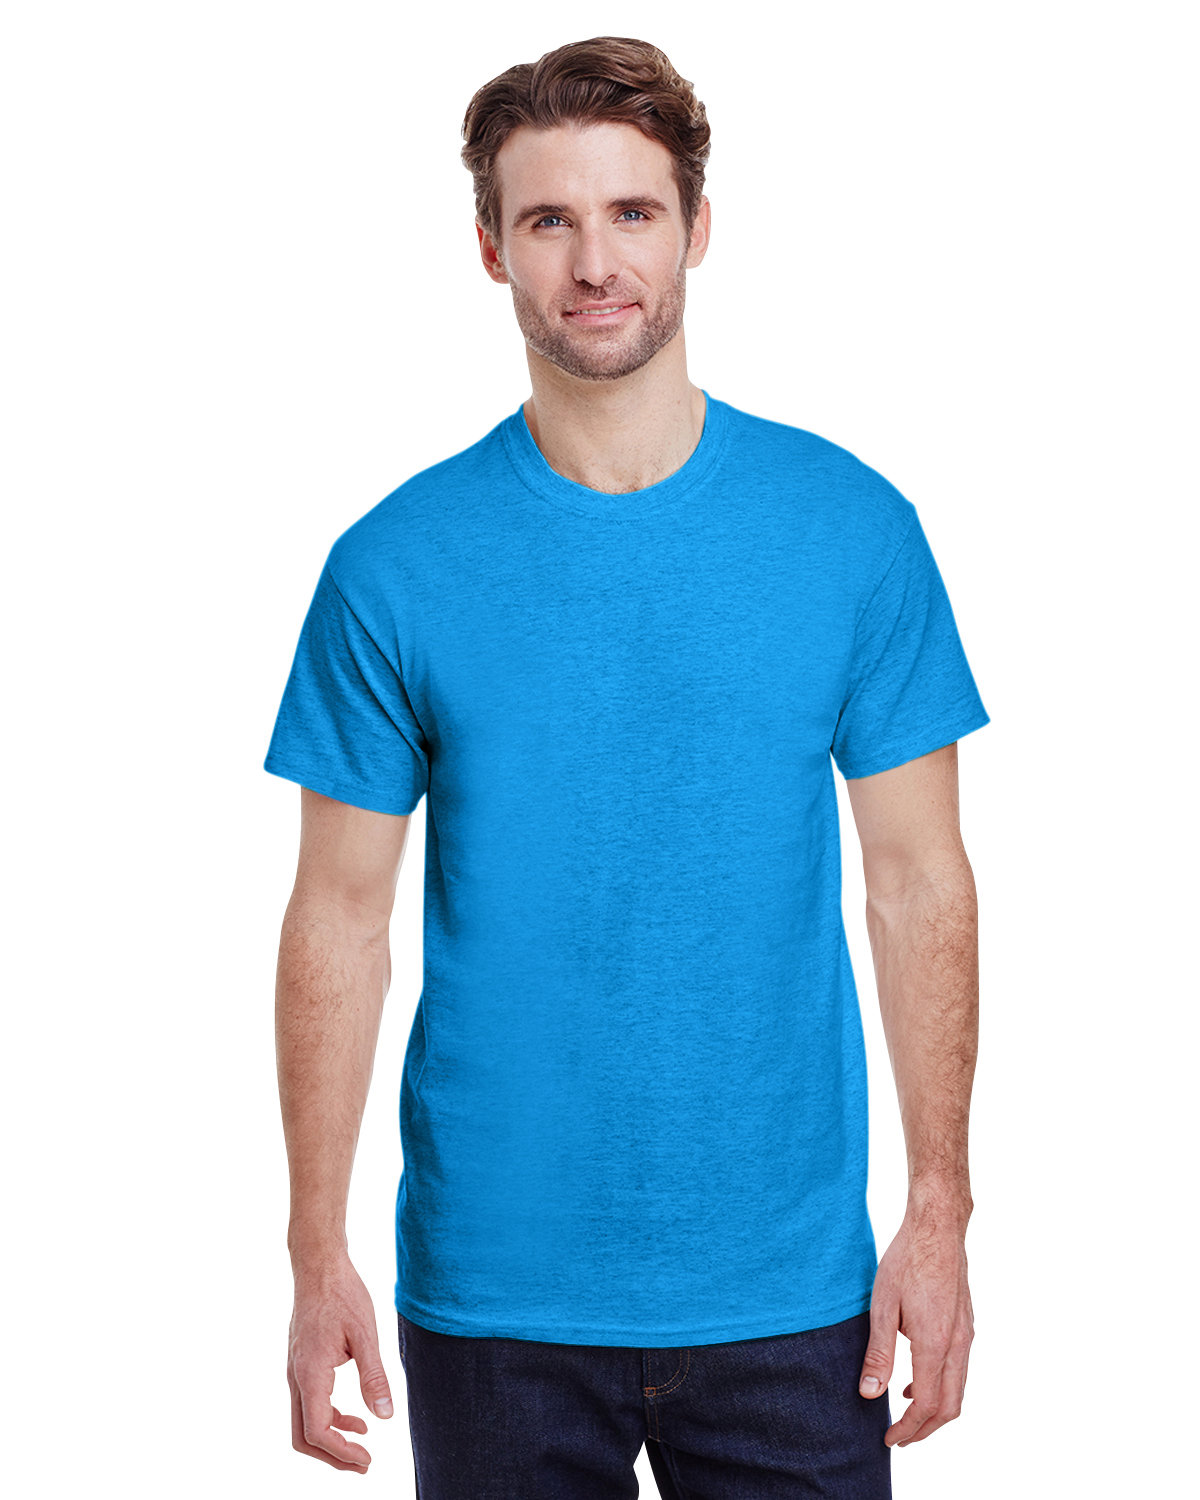 New Plain blank cotton G5000 top casual classic round neck  24 Colours t shirt 